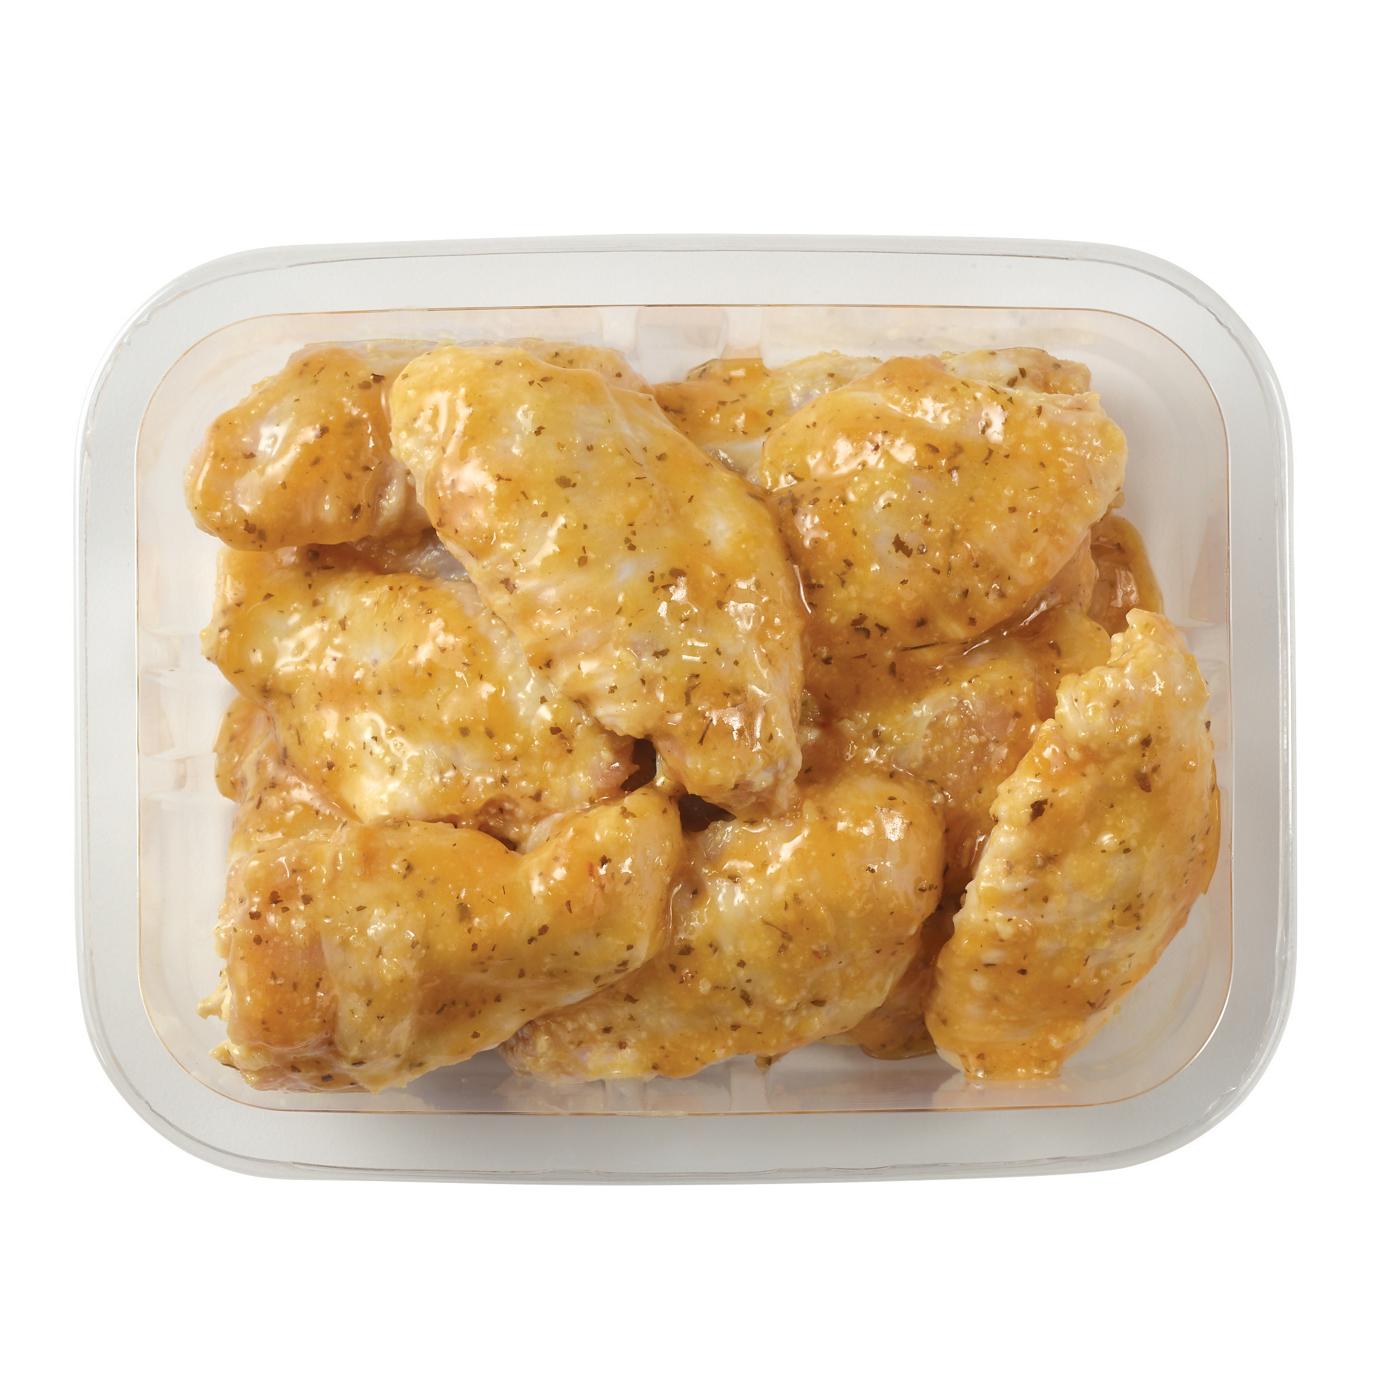 H-E-B Meat Market Marinated Chicken Wings - Garlic Parmesan; image 1 of 3